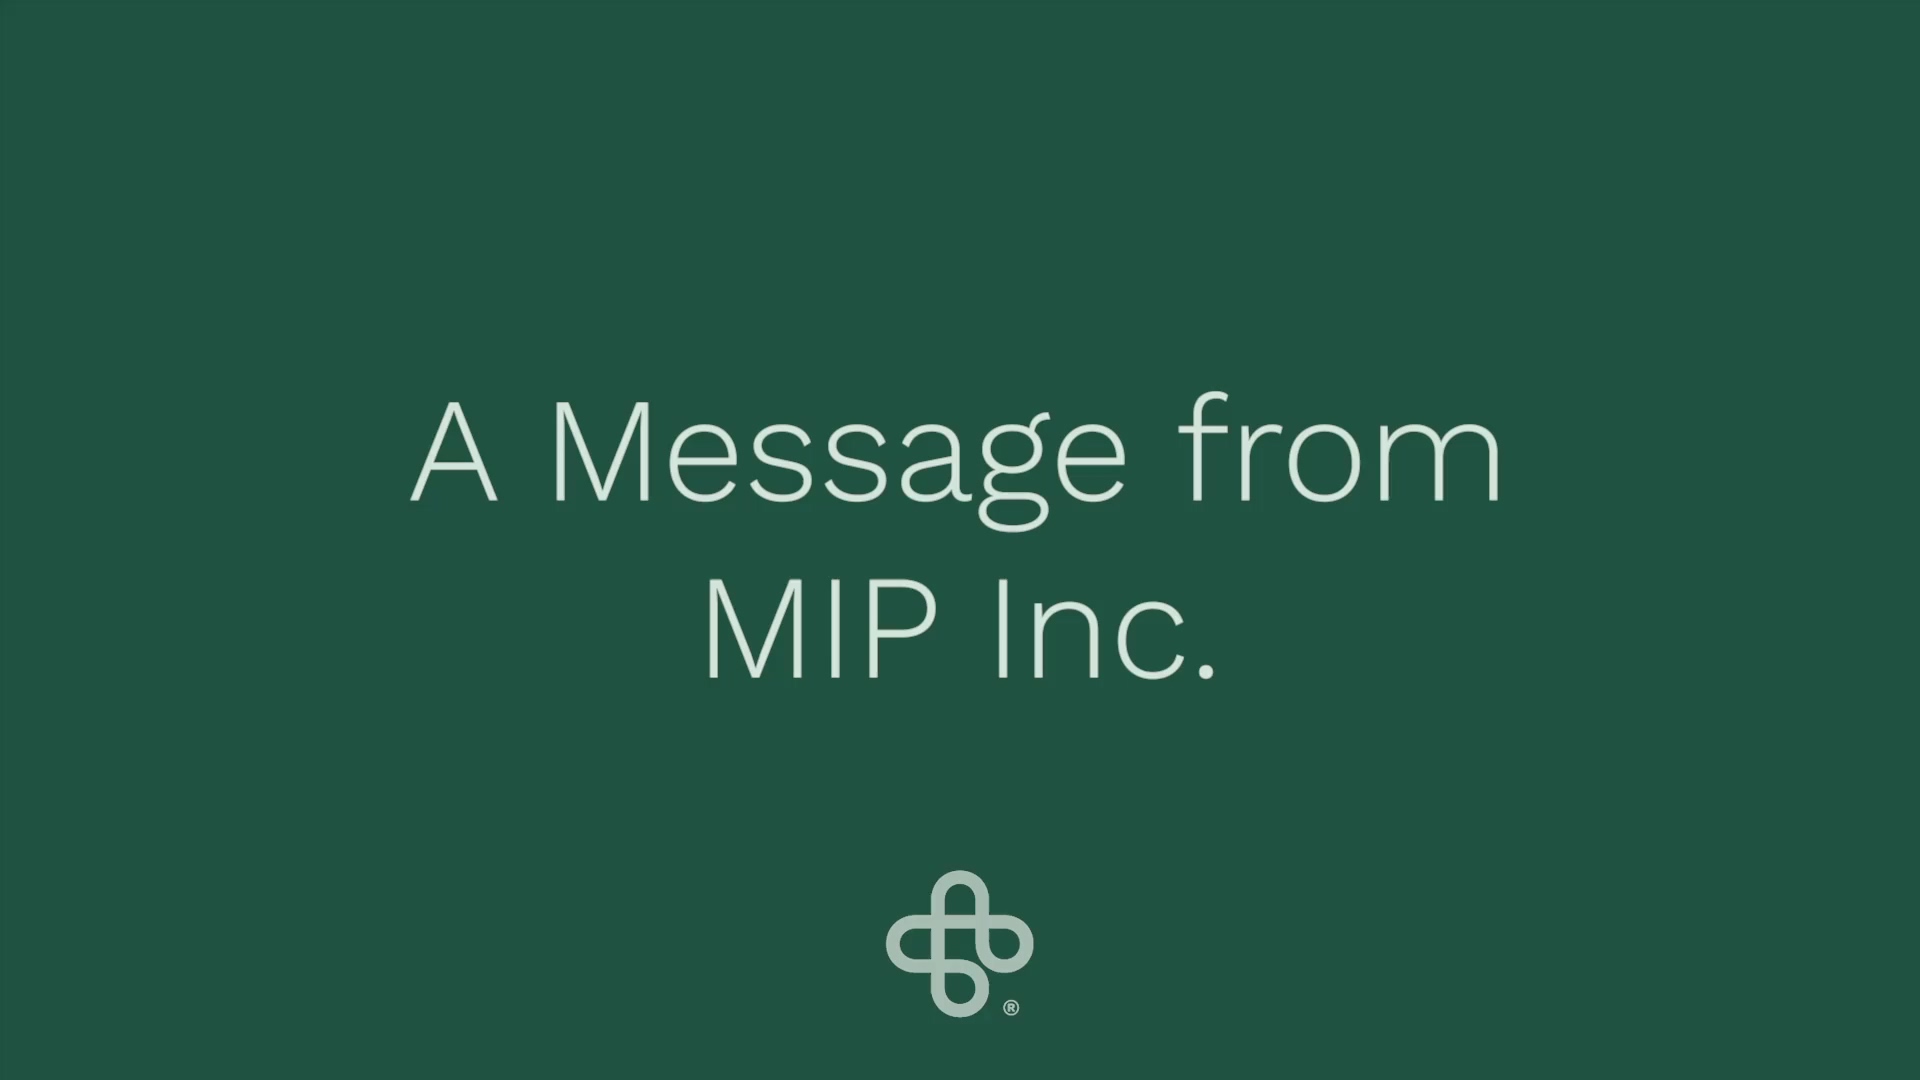 Happy Holidays from MIP Inc.